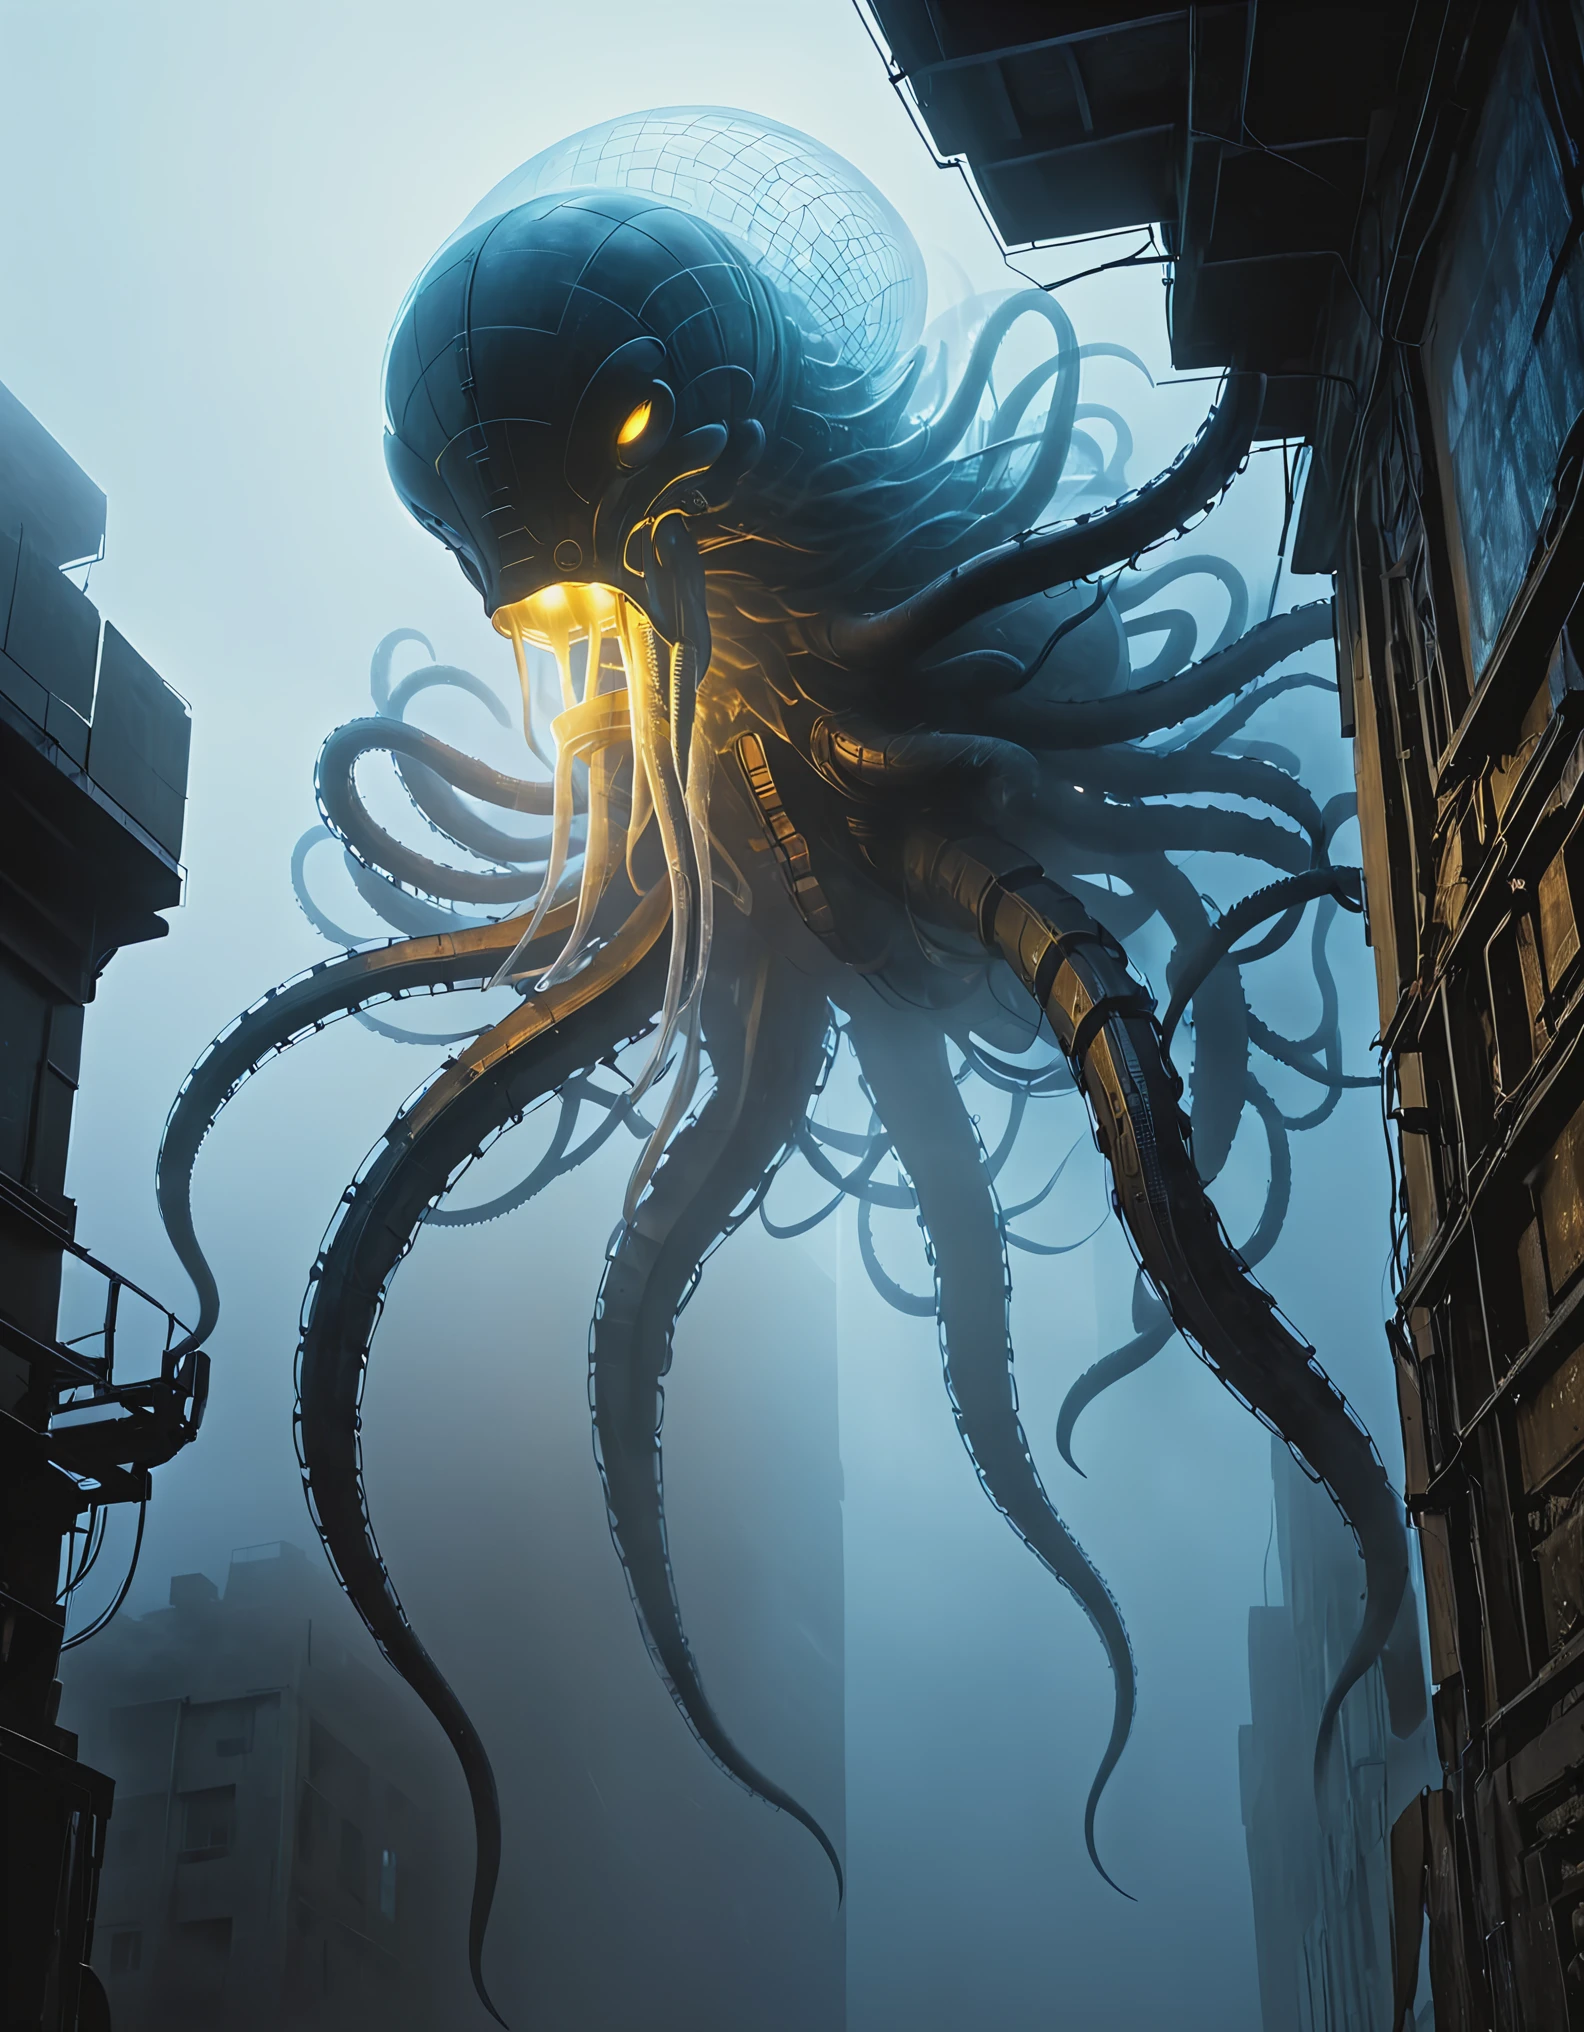 Looking up, (giant transparent mutated creature), this creature has short legs, a lot of dark mist, thick fog, night sky, biochemical mutated nucleus, Teratoid teratoid shape, Grotesque bizarre, Bioluminescence bioluminescent, Zdzistaw Beksinski, Webbed Feet webbed tentacles, Jerky twitching, Slithering winding crawling, Erratic irregular, Wrinkled wrinkled, Microbiology microbiology, There are several wired lighting fixtures in a semi transparent resin wave style, bryce 3D, with mural like composition, weathered materials, glowing sfumato, reflection, high detail, surreal 3D landscape style, complex mesh, lightbox, made of feathers, nyc explosion coverage, interesting character design, bokeh, dense fog,
From below, upside down, chiaroscuro, UHD, masterpiece, super detail, high details, high quality, award winning, best quality, highs, 16k,